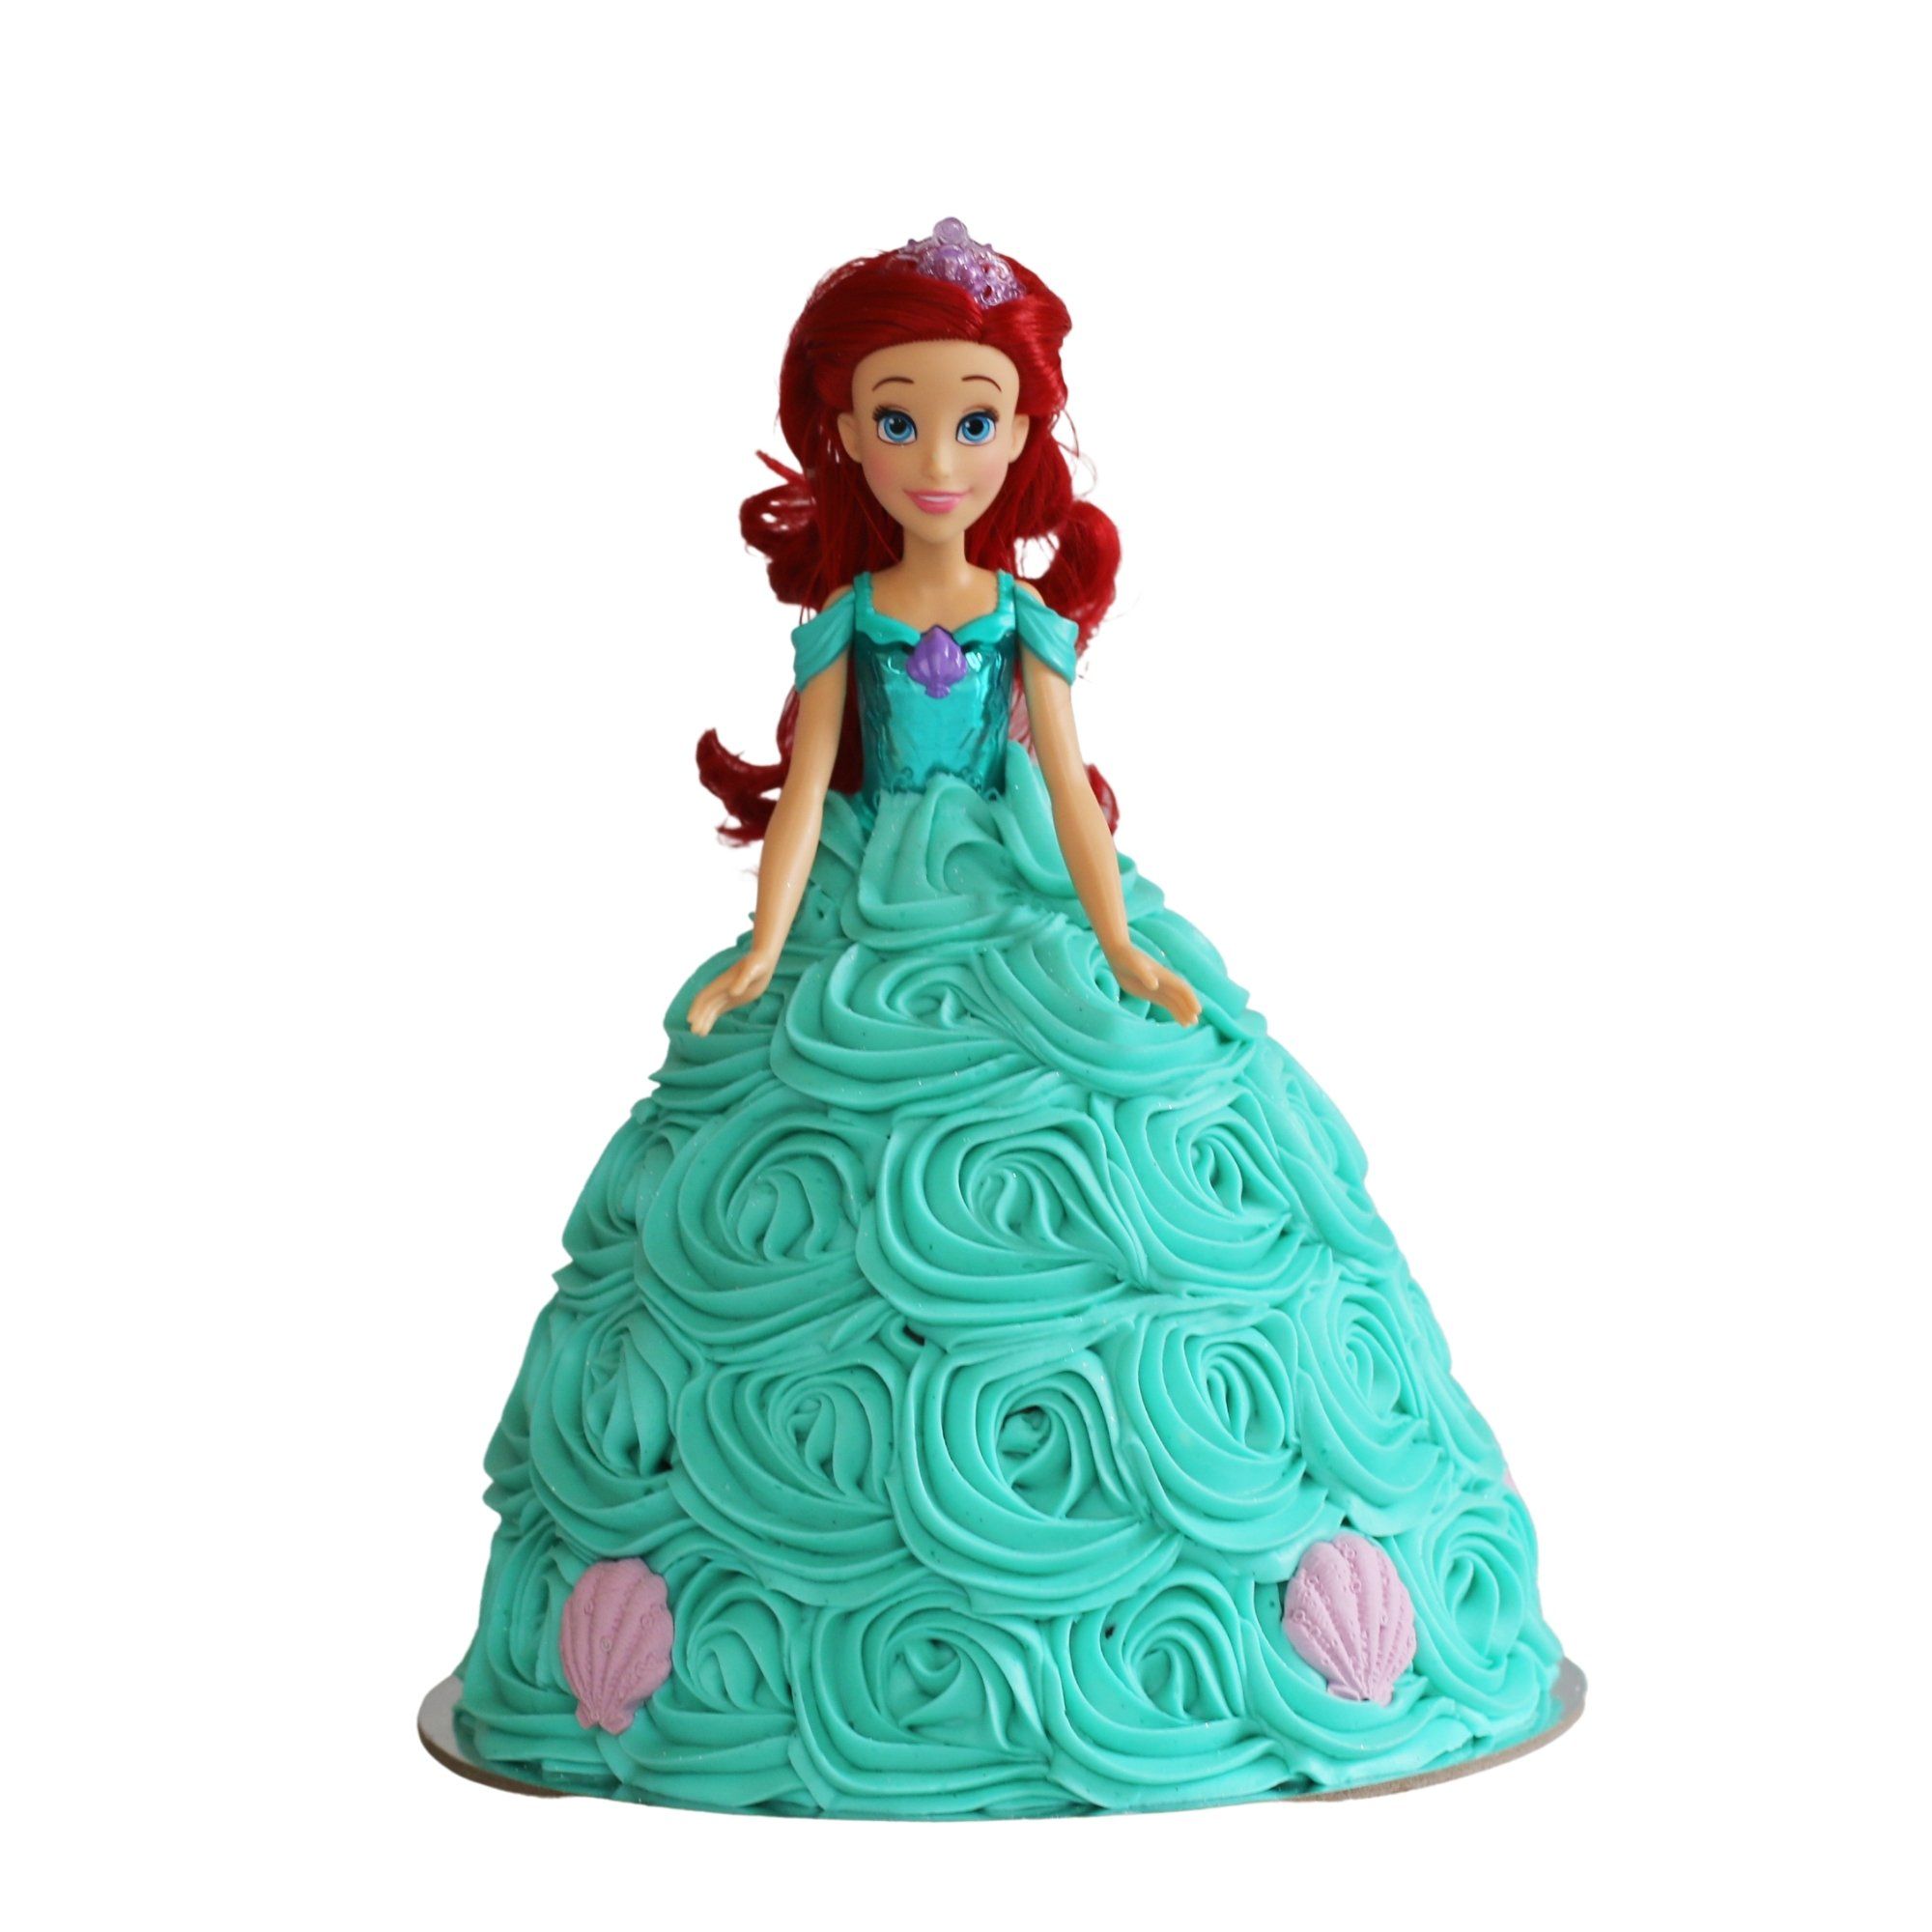 Ariel Doll Cake Special Occasion The Cupcake Queens 